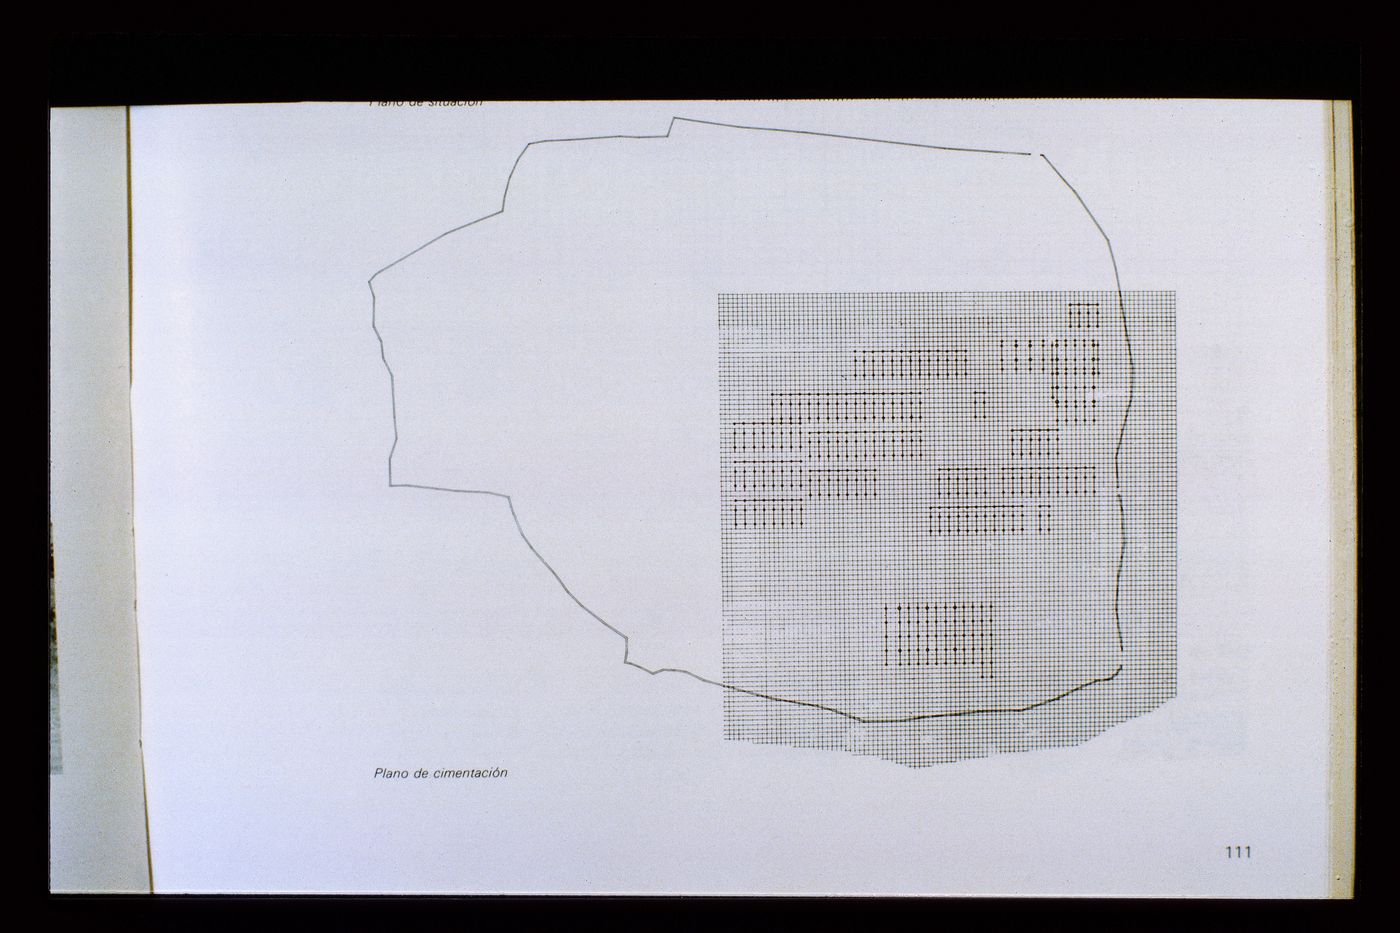 Slide of a drawing for Residential College for the Provincial Savings Bank, Orense, by Alejandro de la Sota